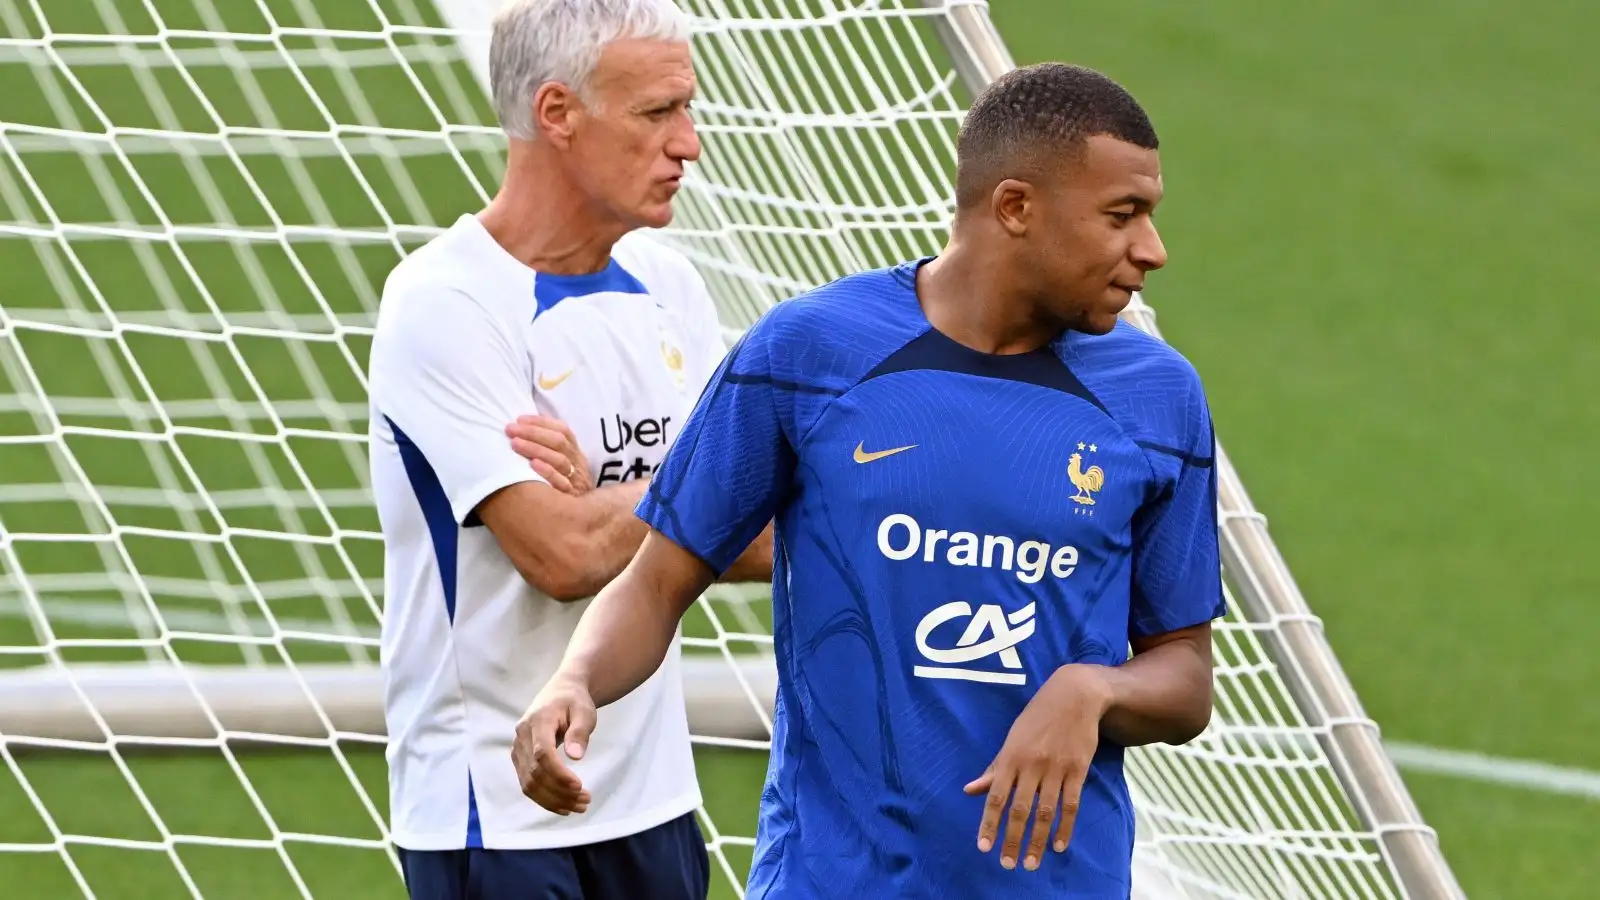 Kylian Mbappe and also Didier Deschamps during a France training session.